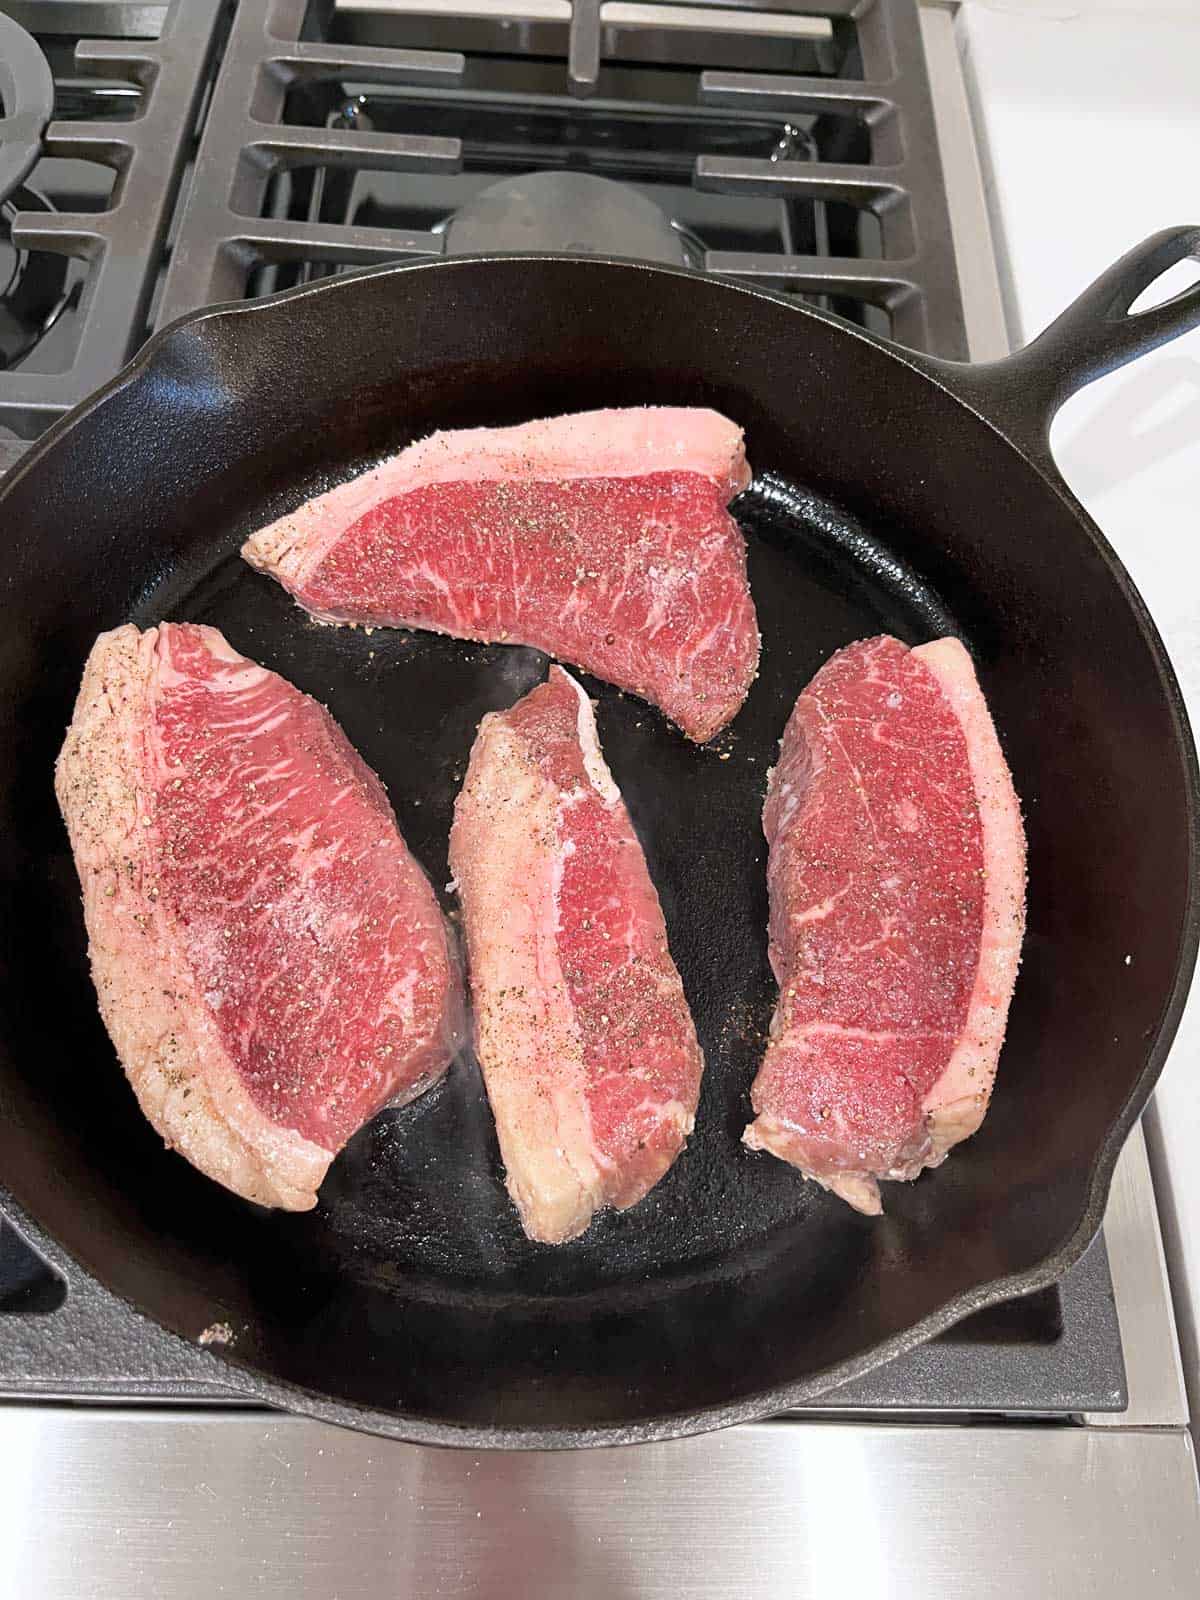 Different sizes of picanha are cooked in the same skillet.